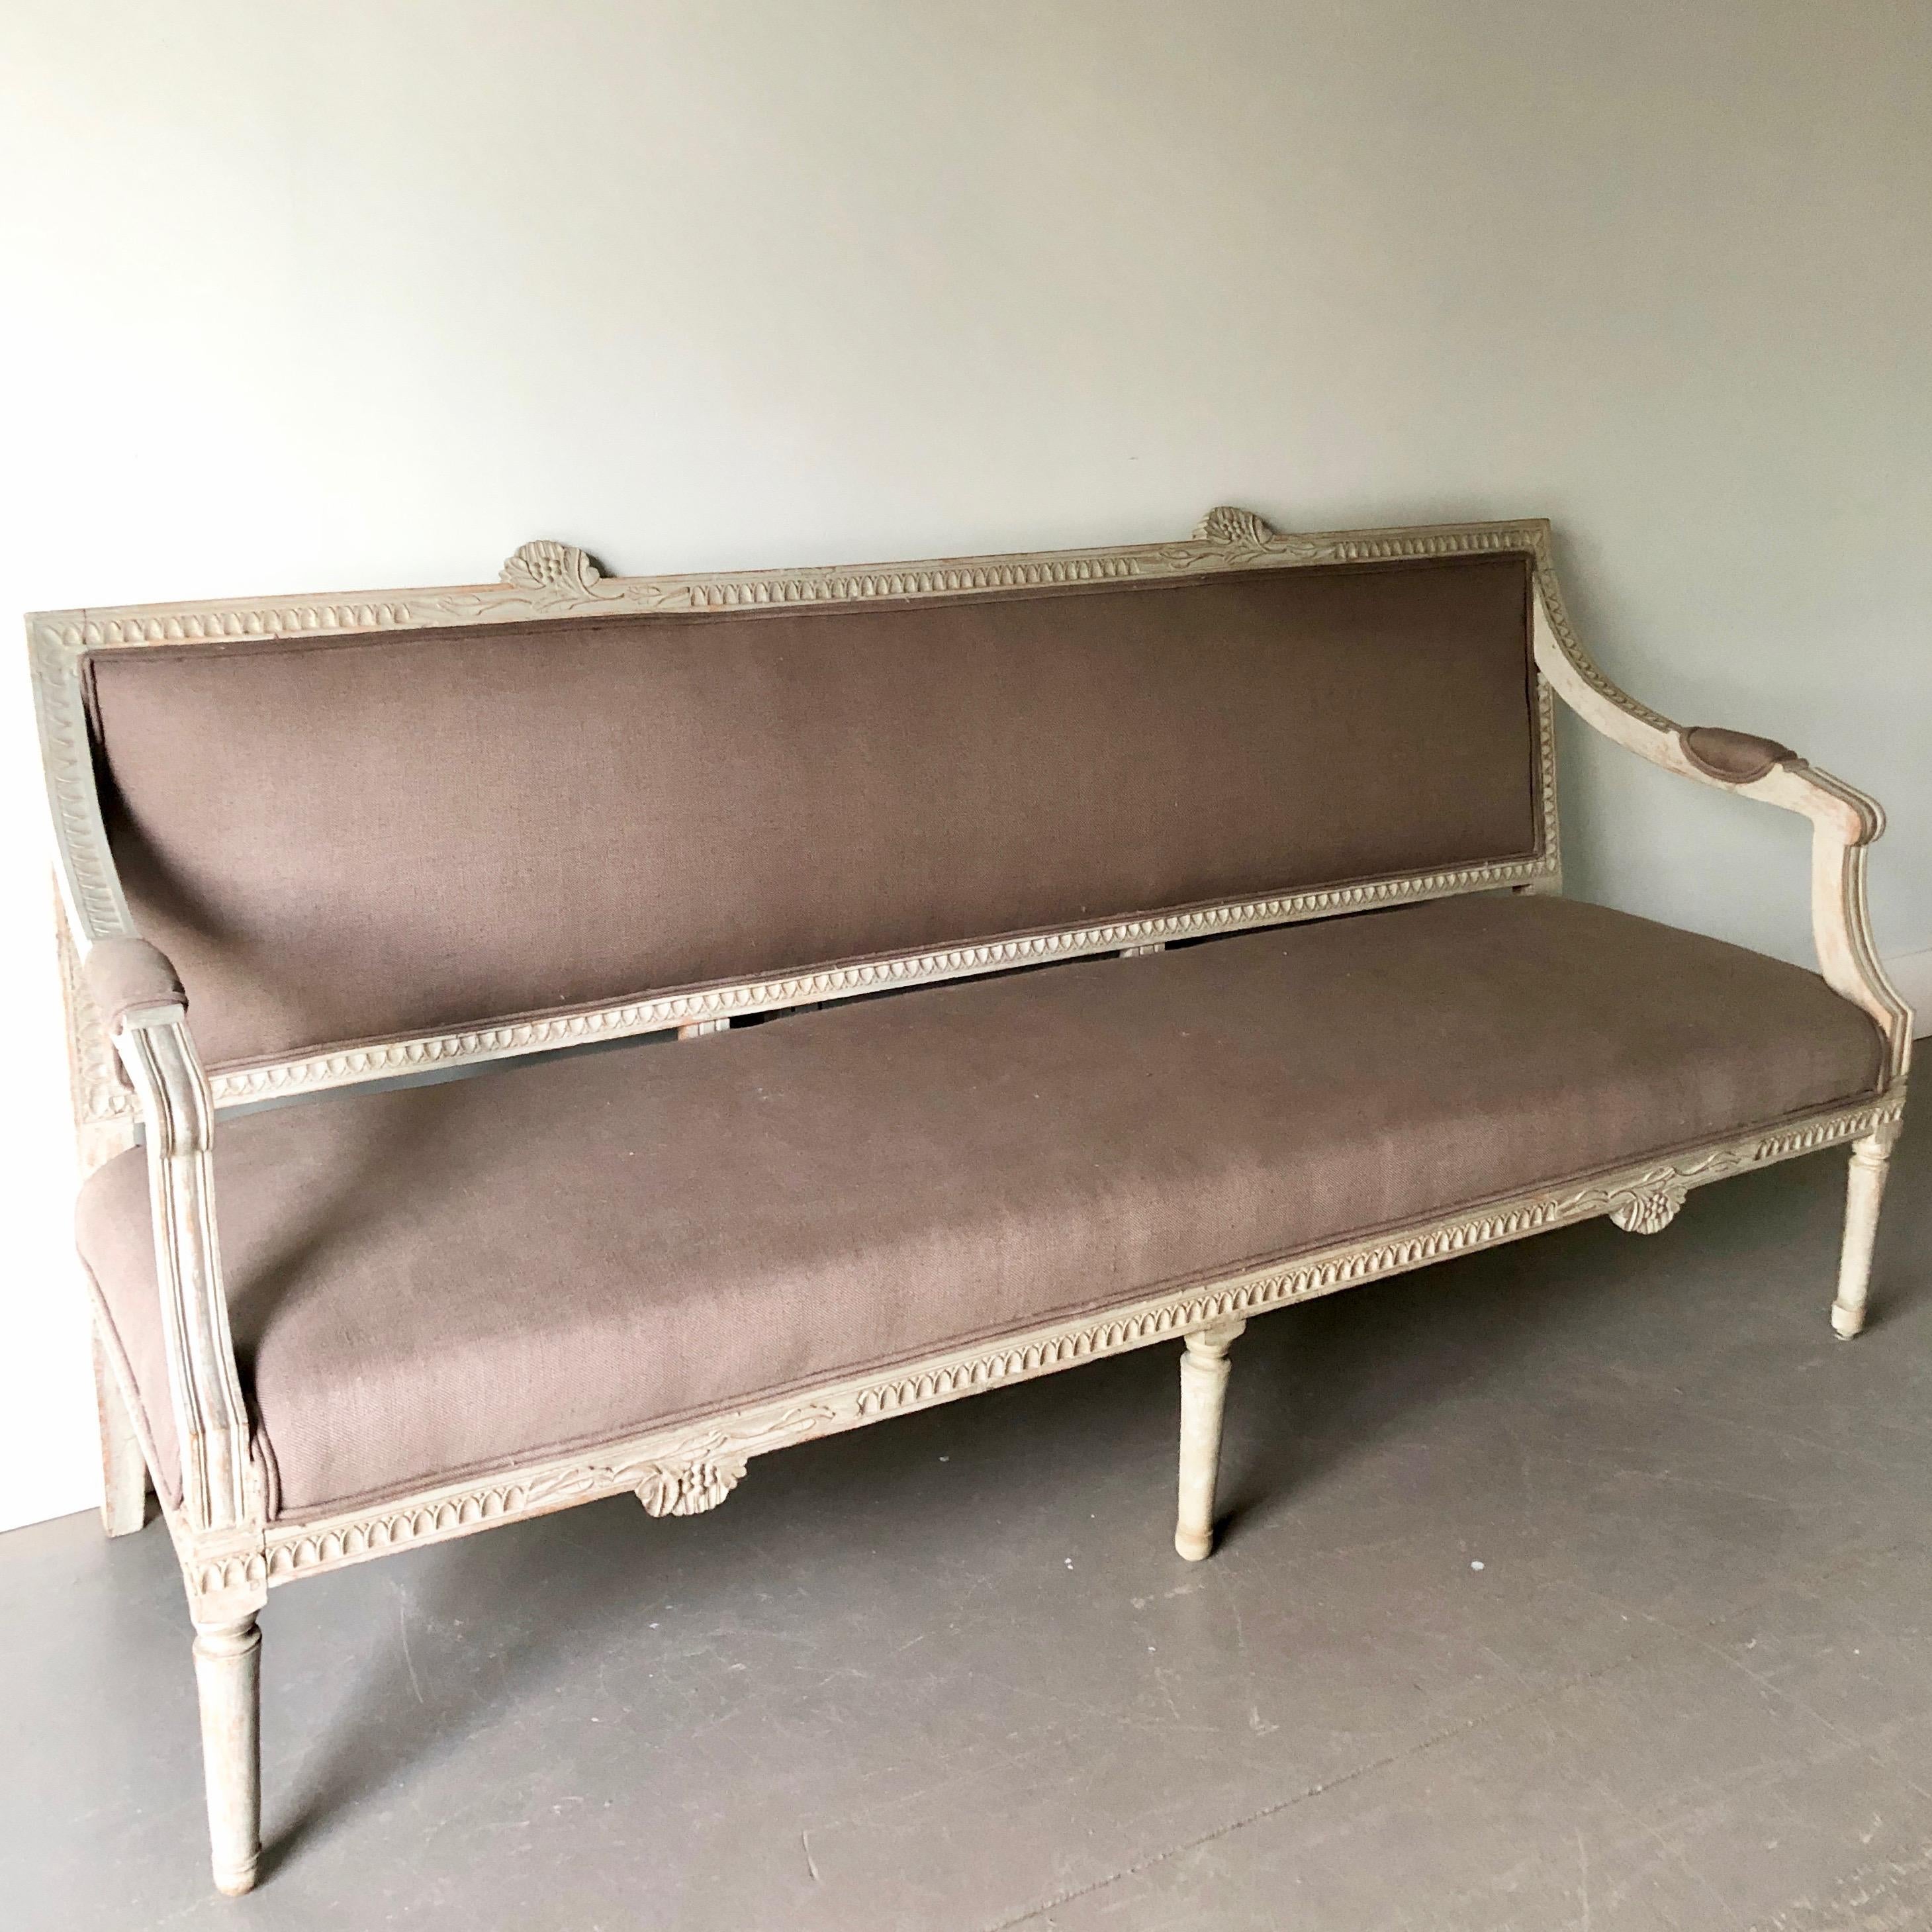 Painted Gustavian period settee, having the signature fruit and flower carvings of the hops plant used by Lindome furniture makers. Hand scraped to the original color and upholstered in gray linen.
Sweden, circa 1800.